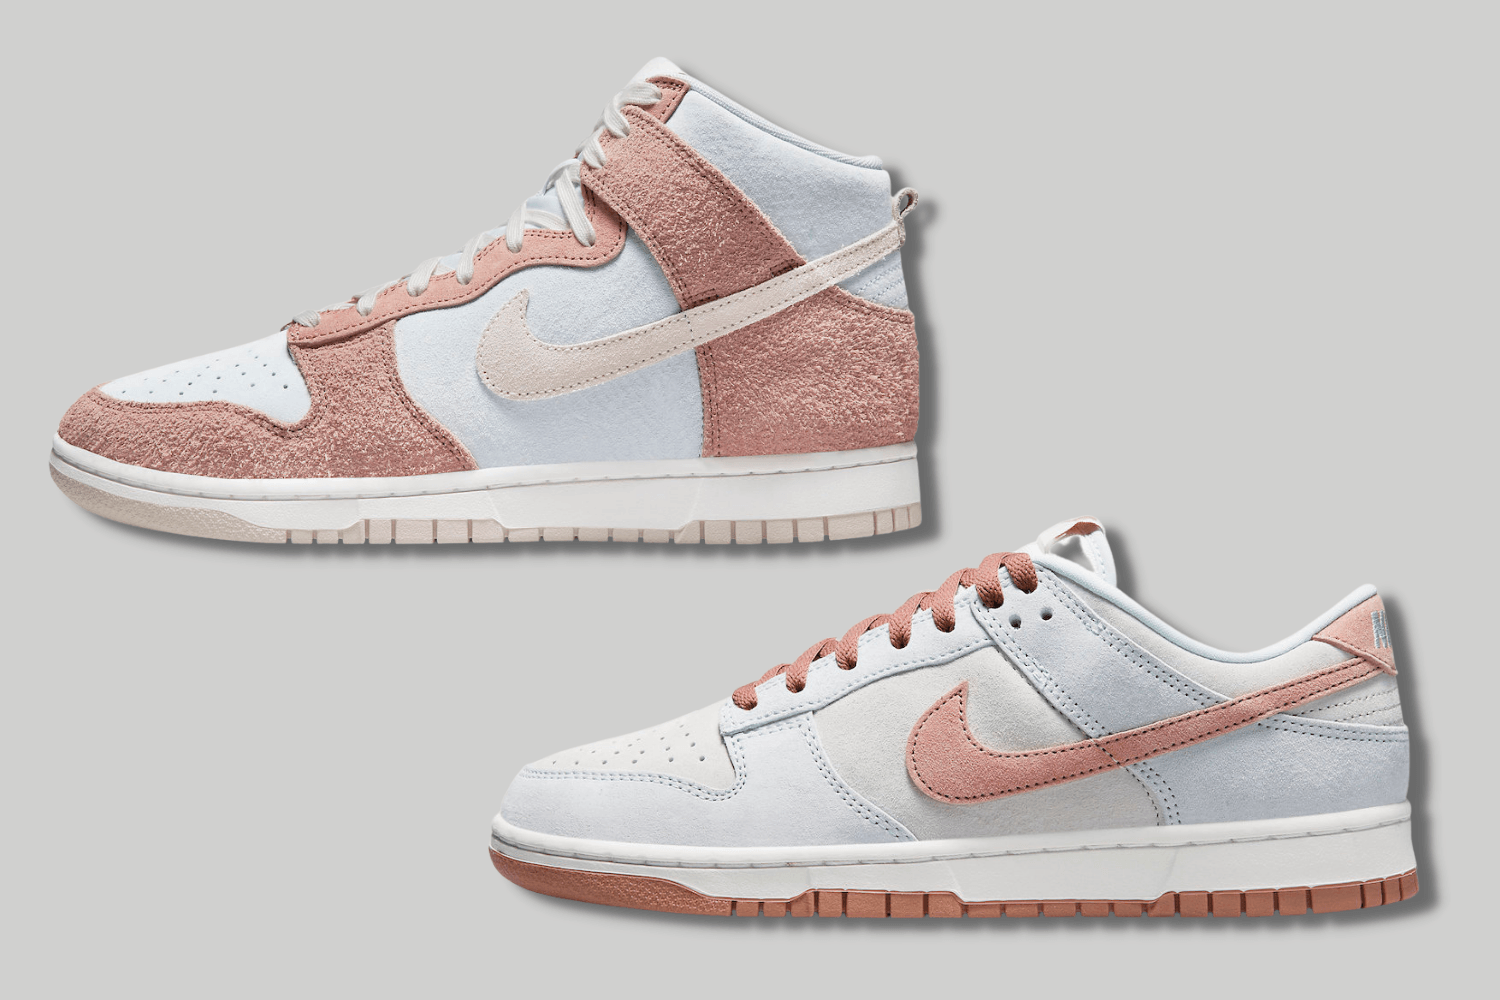 Are you ready for the Nike Dunk 'Fossil Rose' pack?